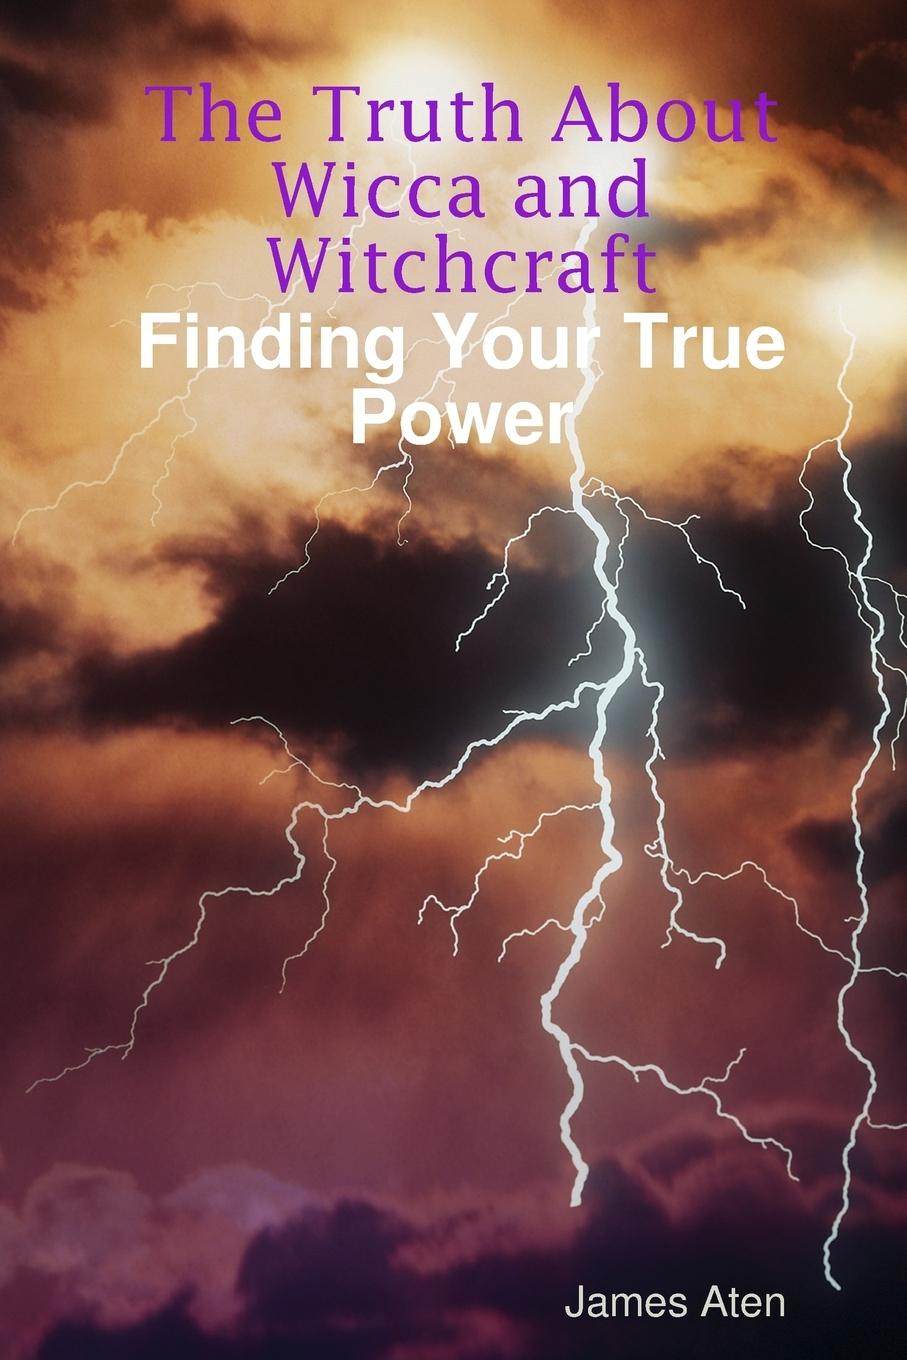 The Truth About Wicca and Witchcraft Finding Your True Power - Aten, James